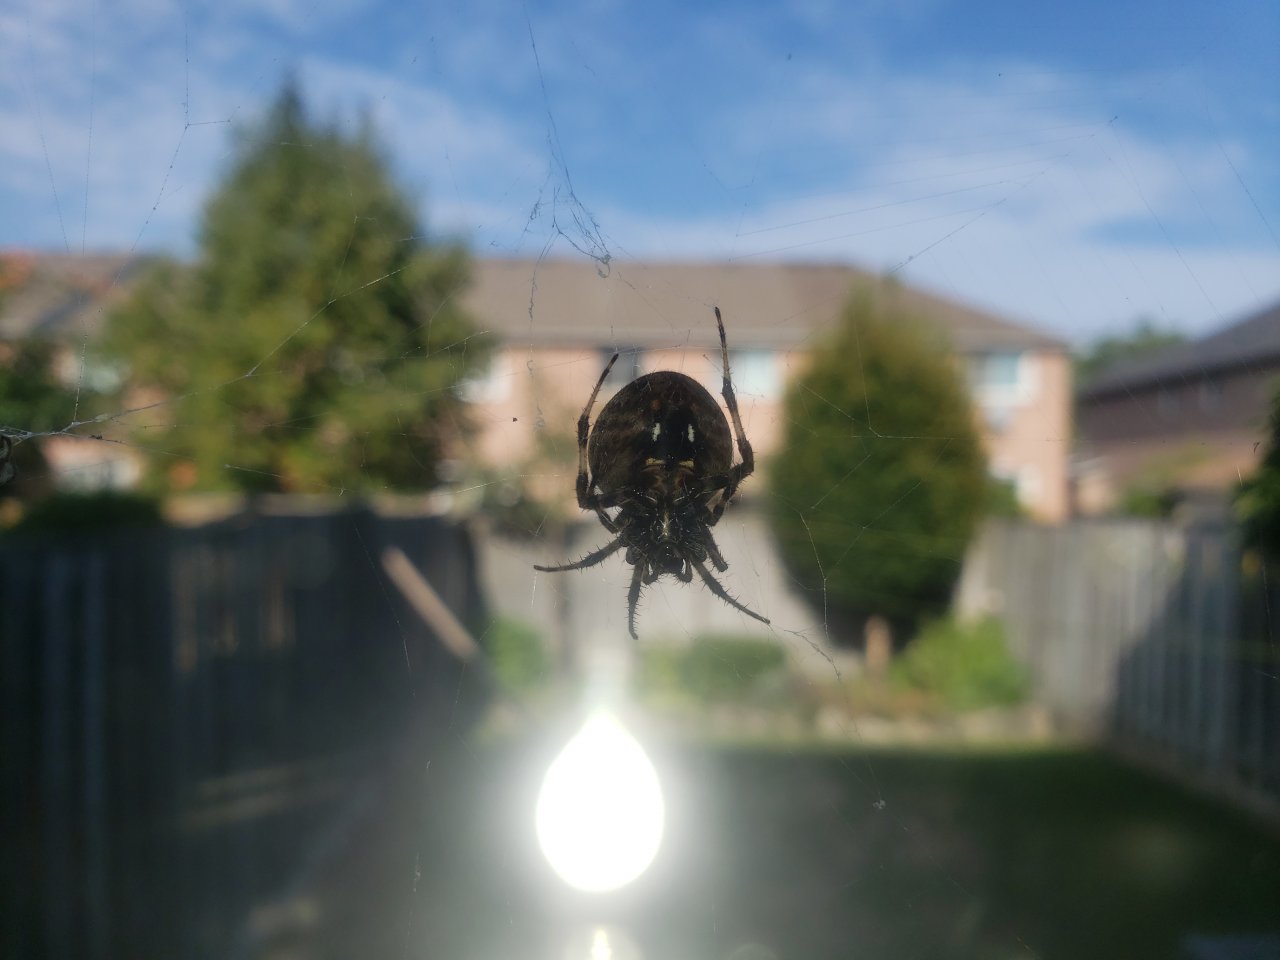 Huge Spider netting outside my house. Anyone know the species? 1